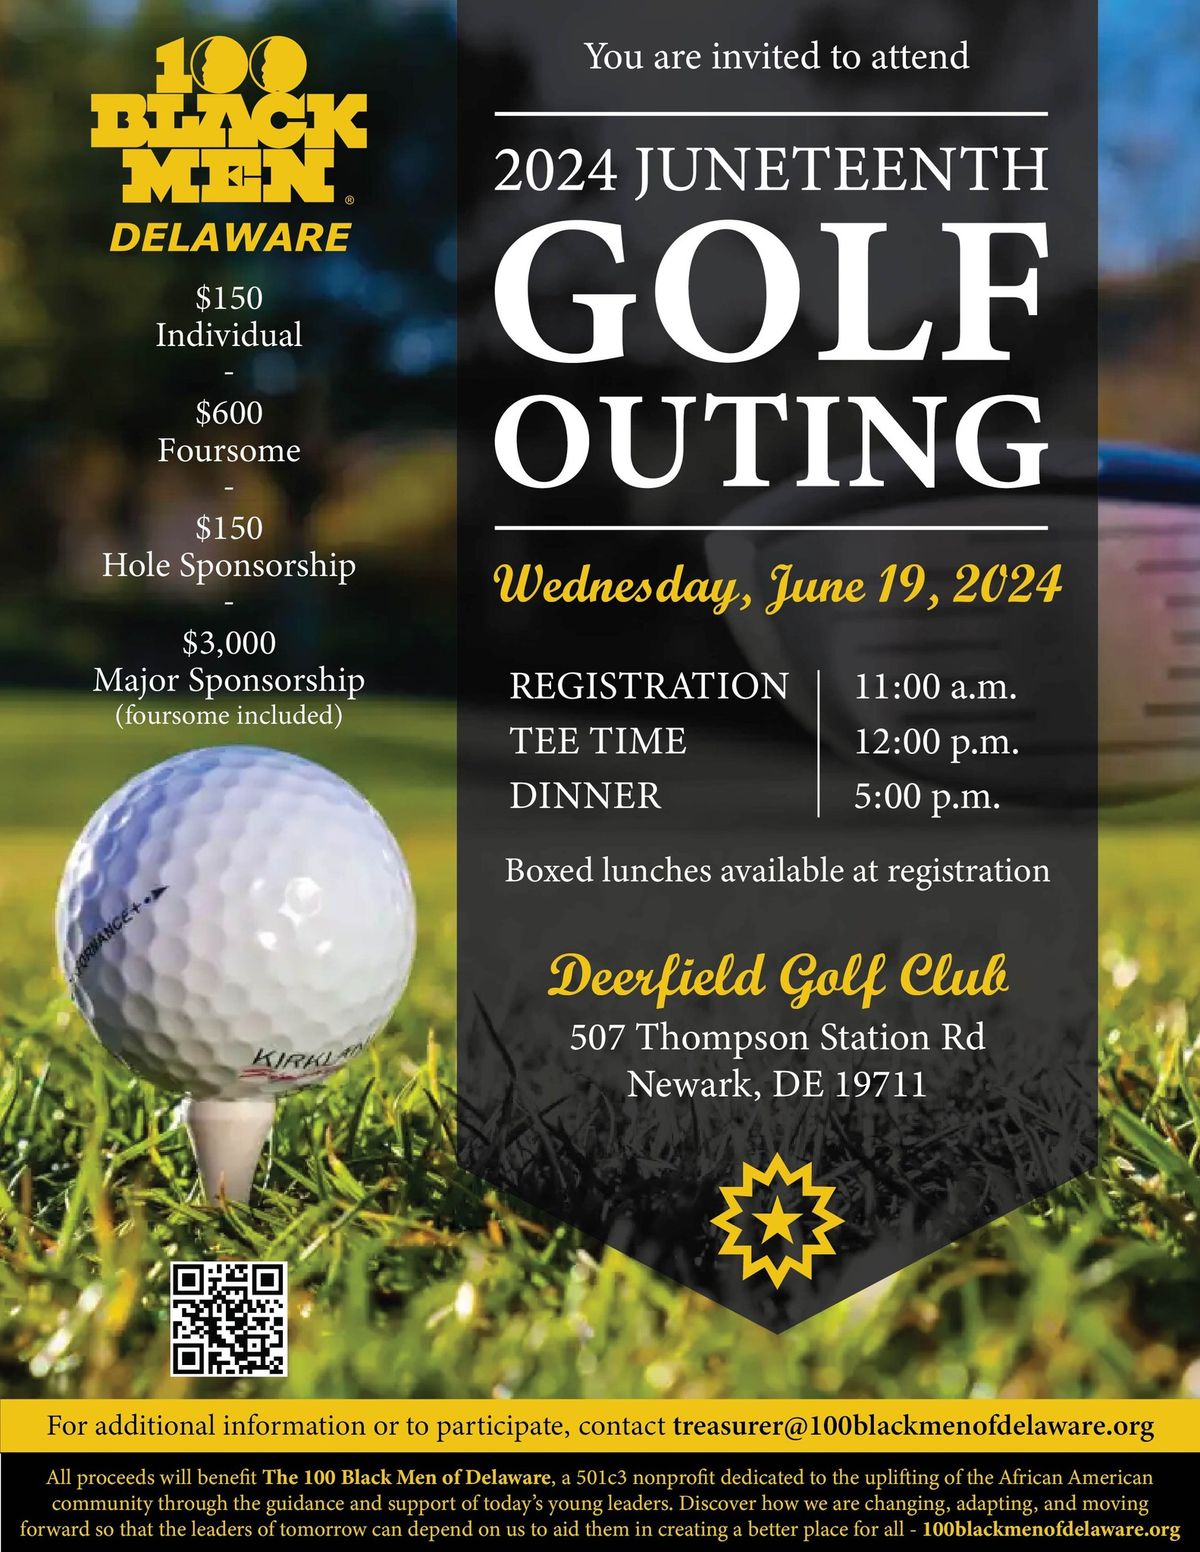 2nd Annual 100BMOD Juneteenth Golf Outing